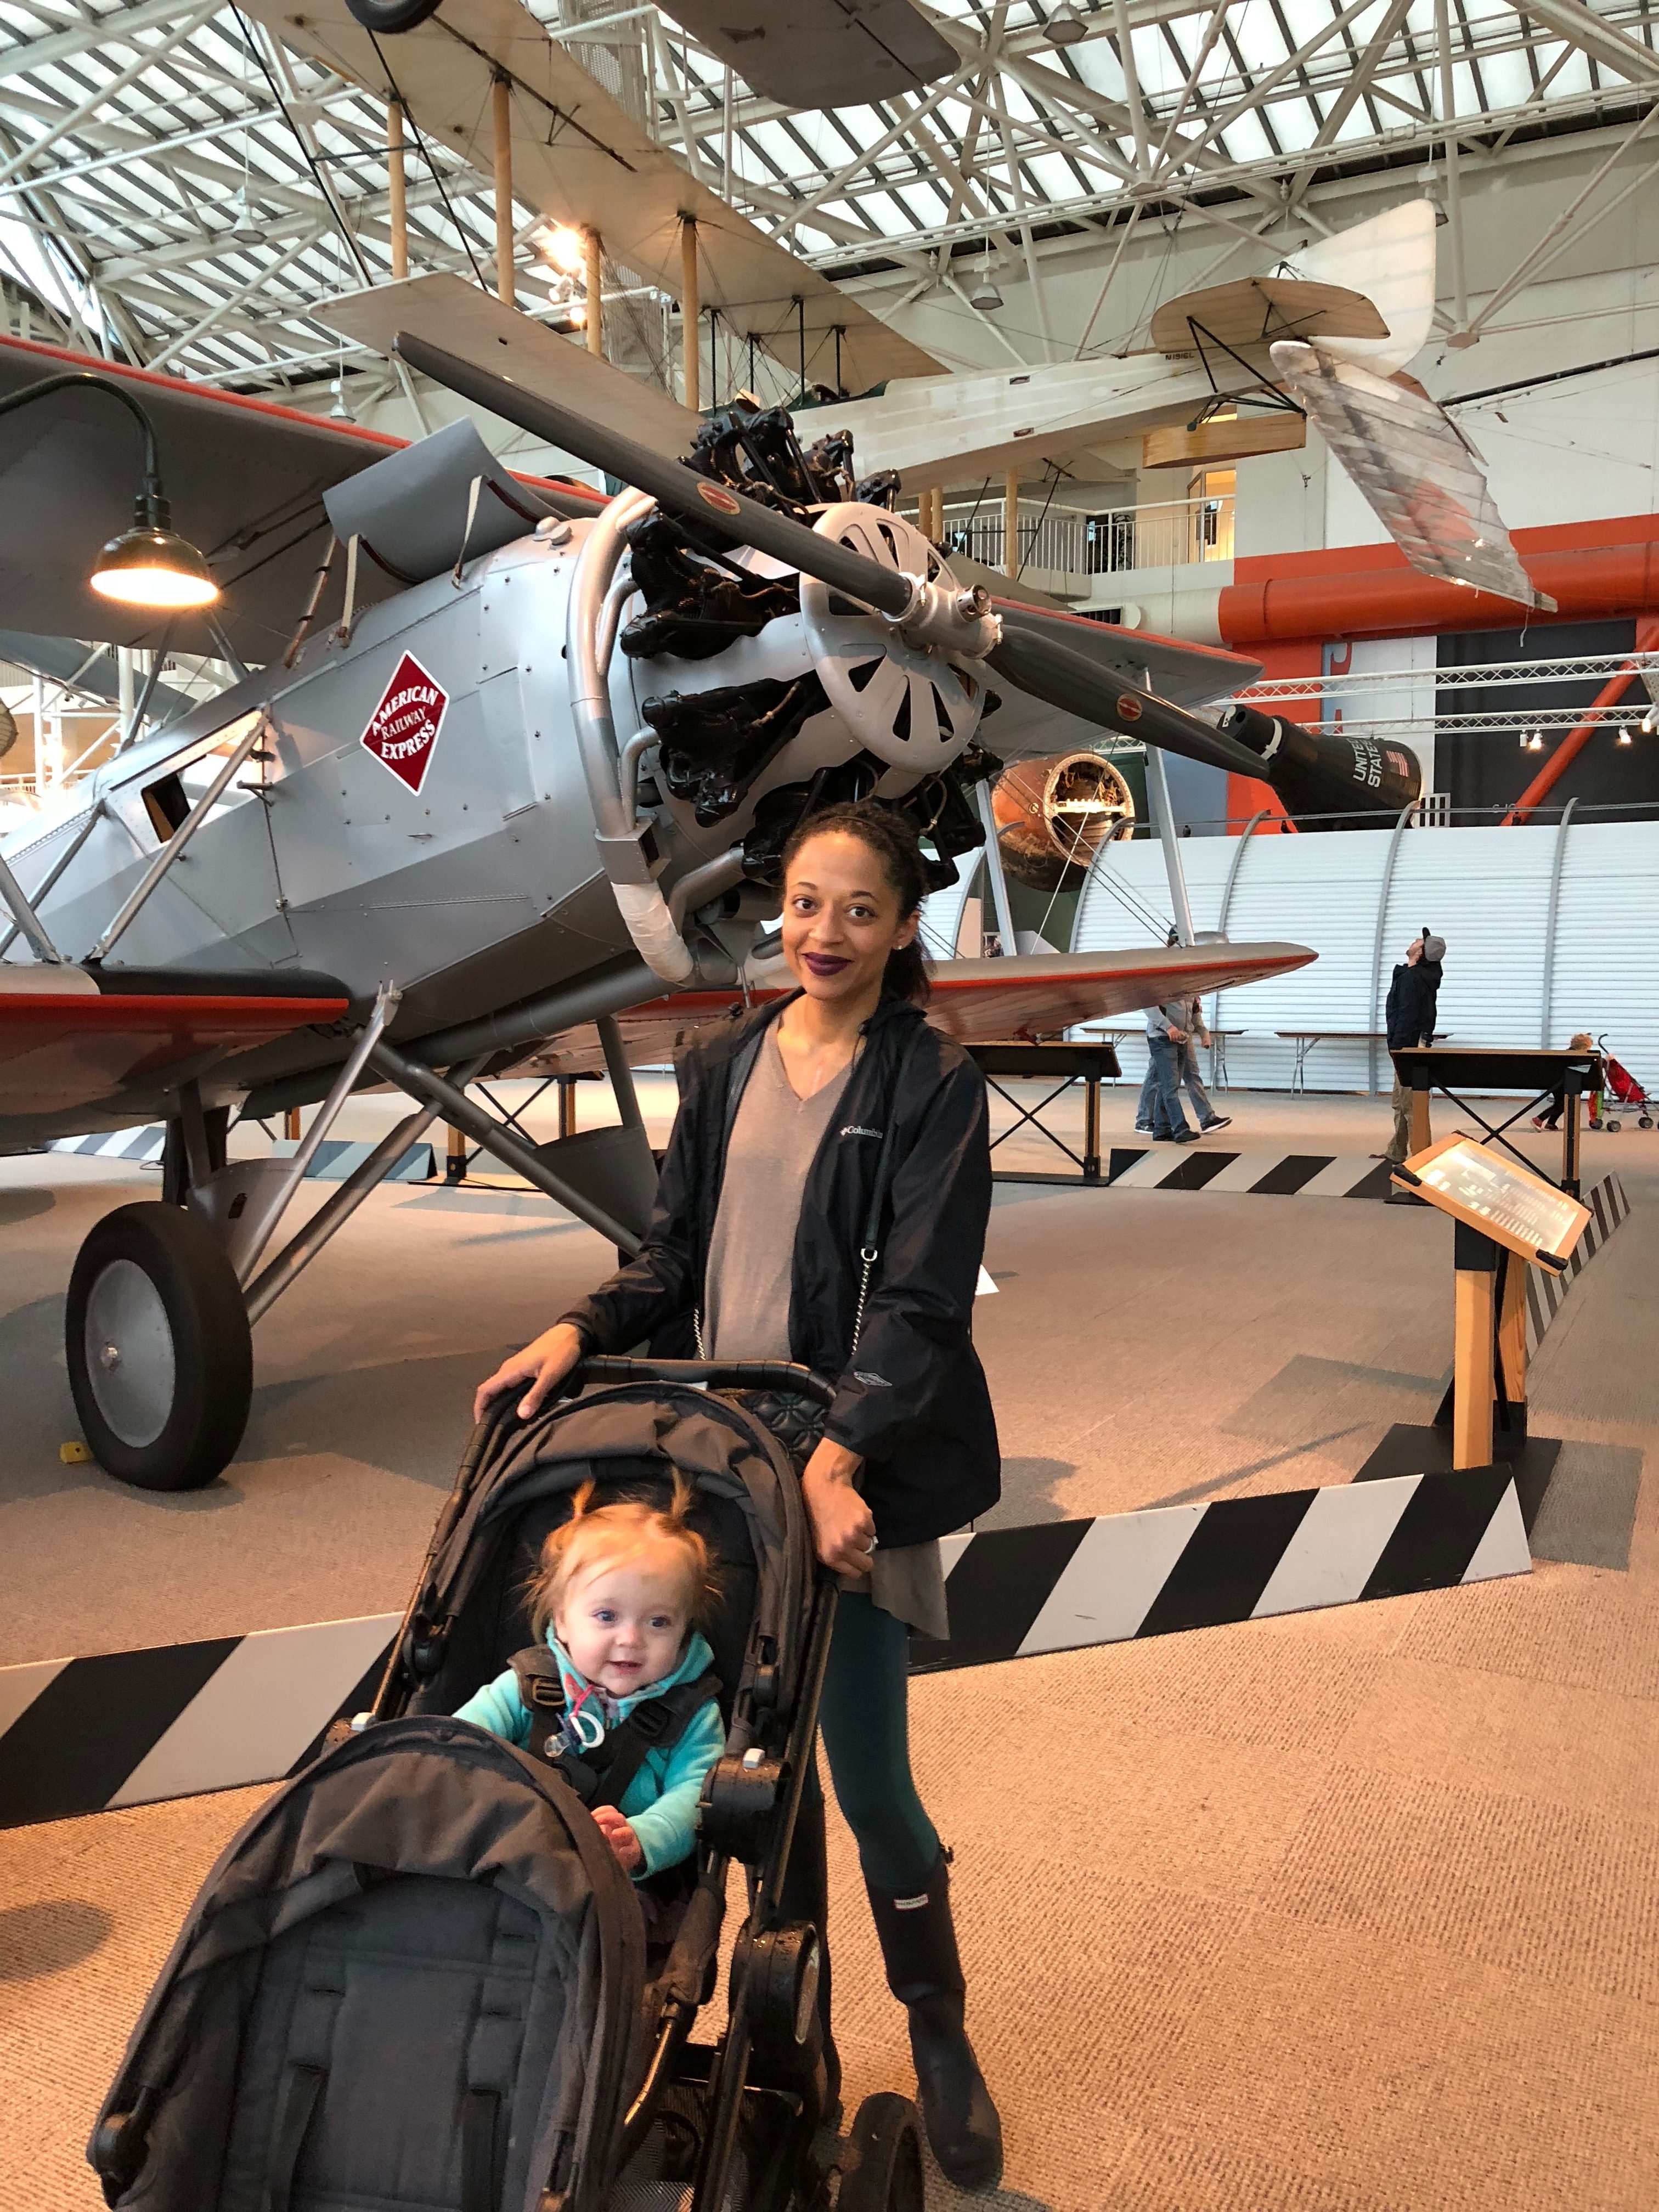 First Year Post-Transplant - Museum of Flight